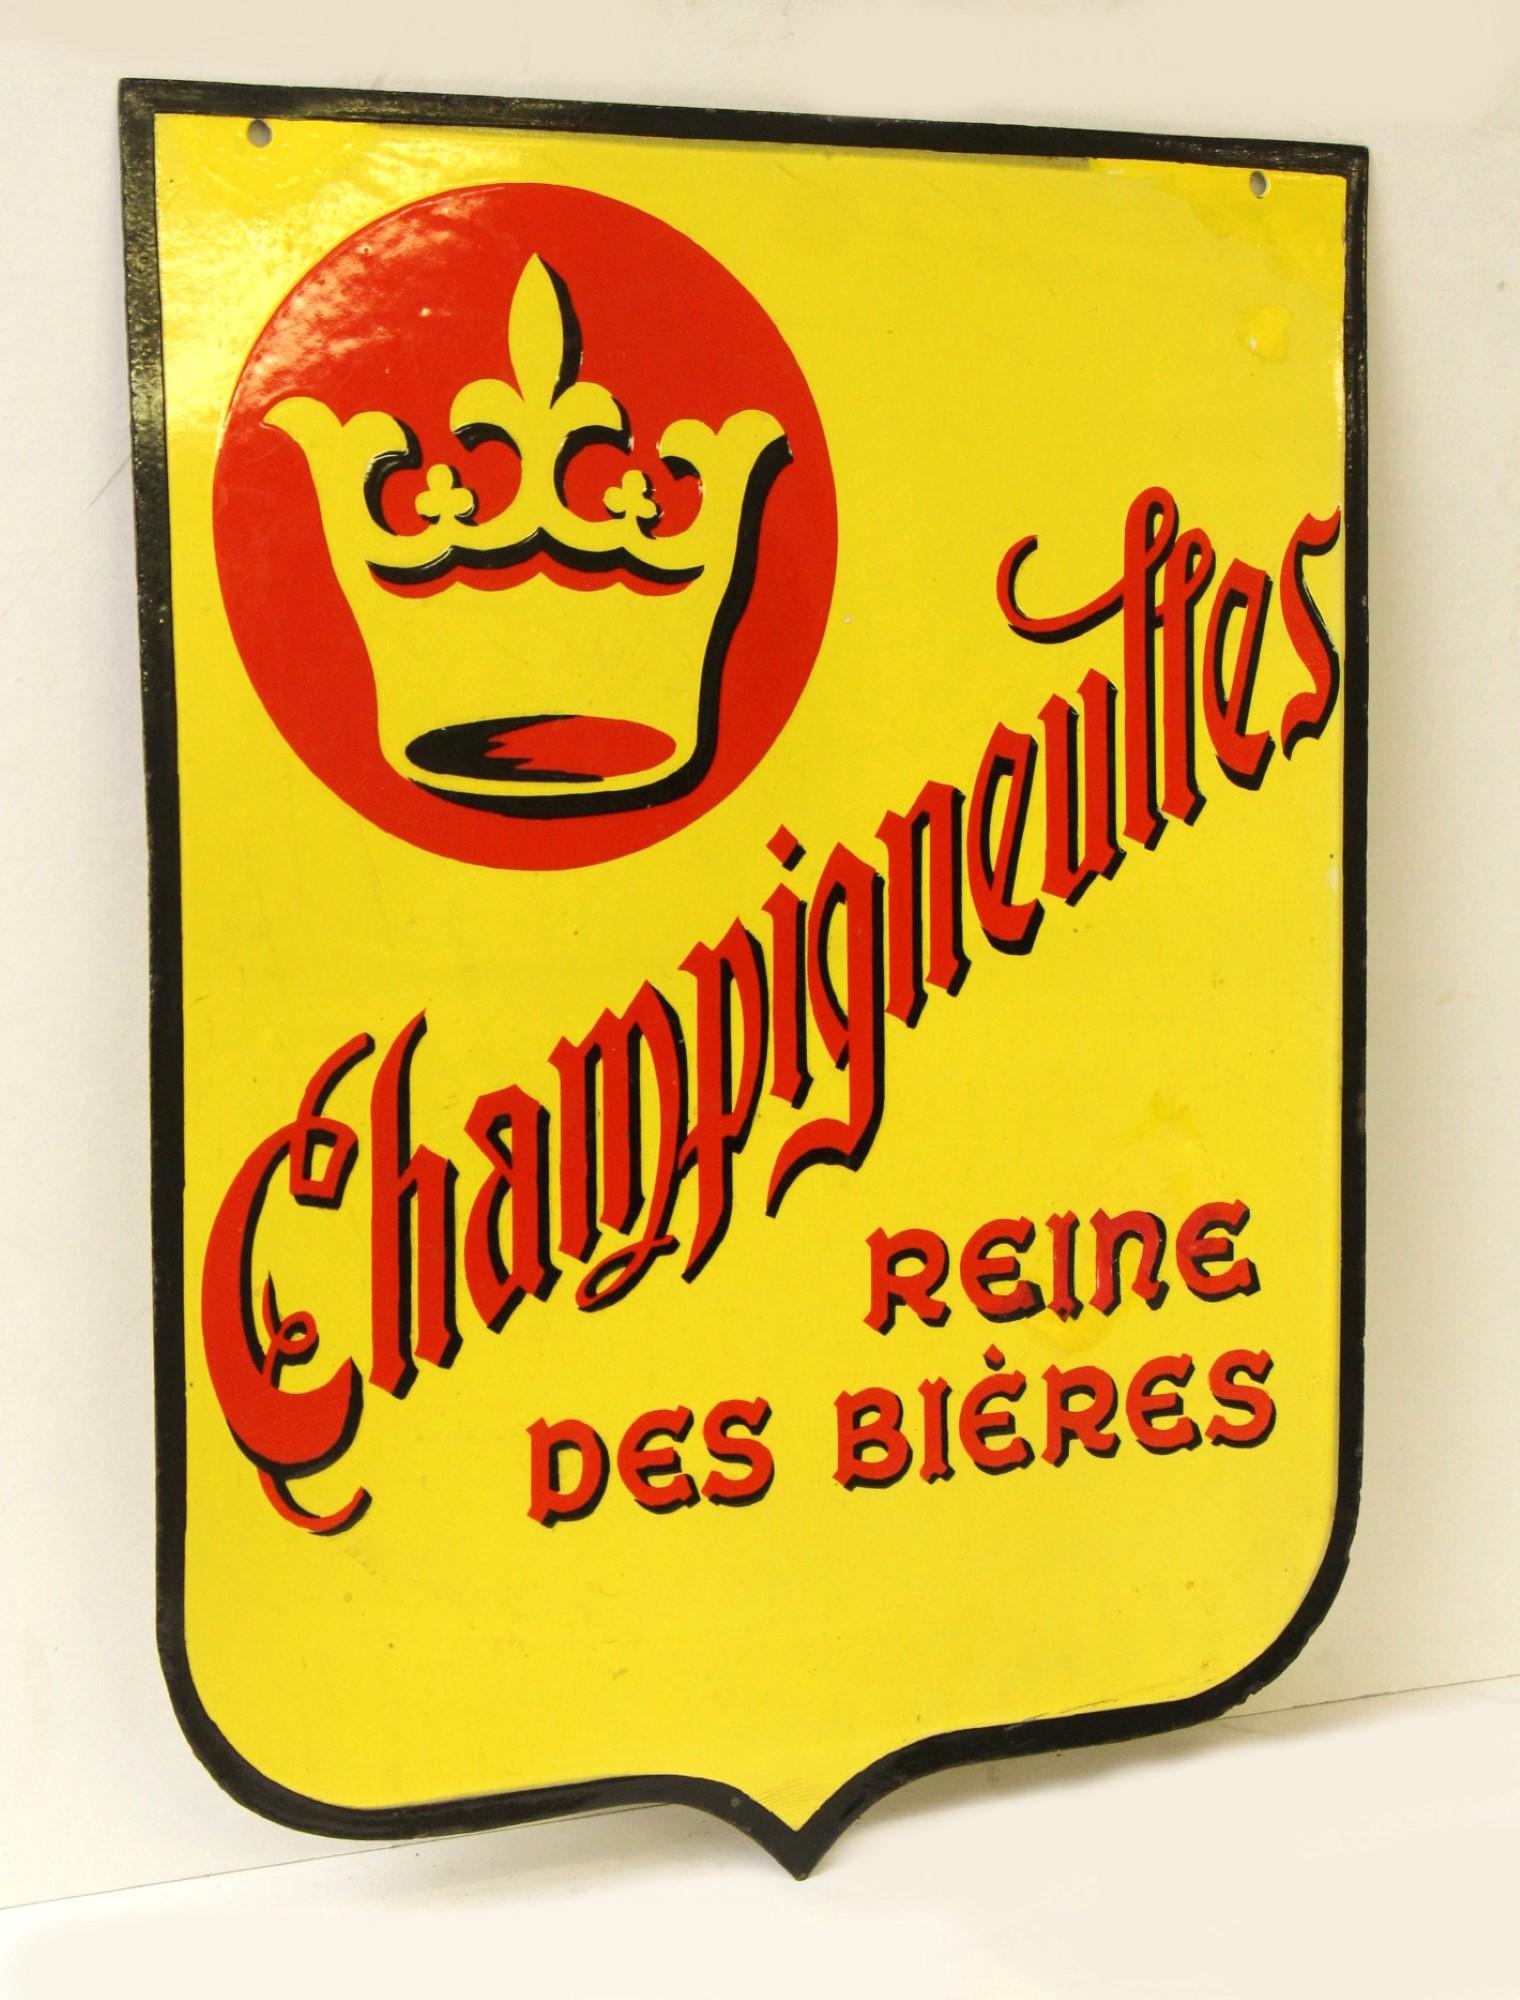 Two sided yellow steel wall sign featuring a yellow crown in a red circle and 